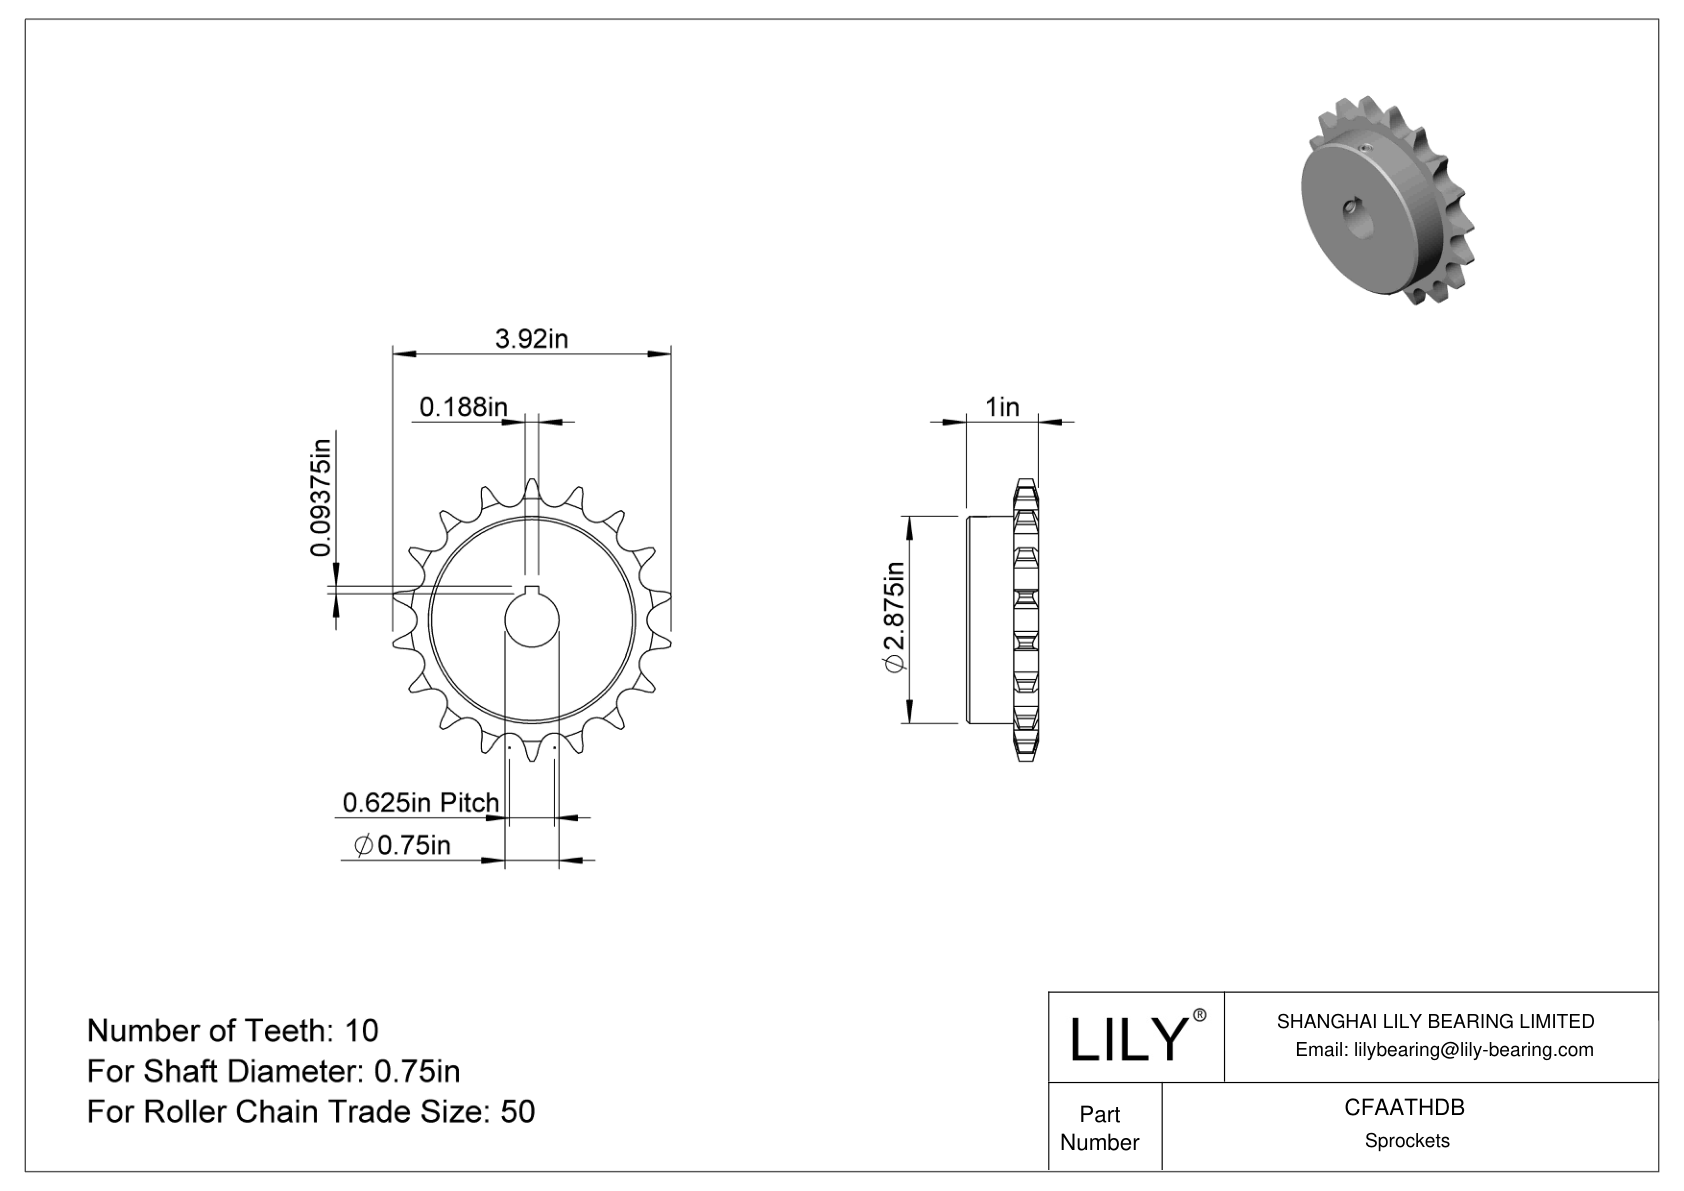 CFAATHDB Wear-Resistant Sprockets for ANSI Roller Chain cad drawing